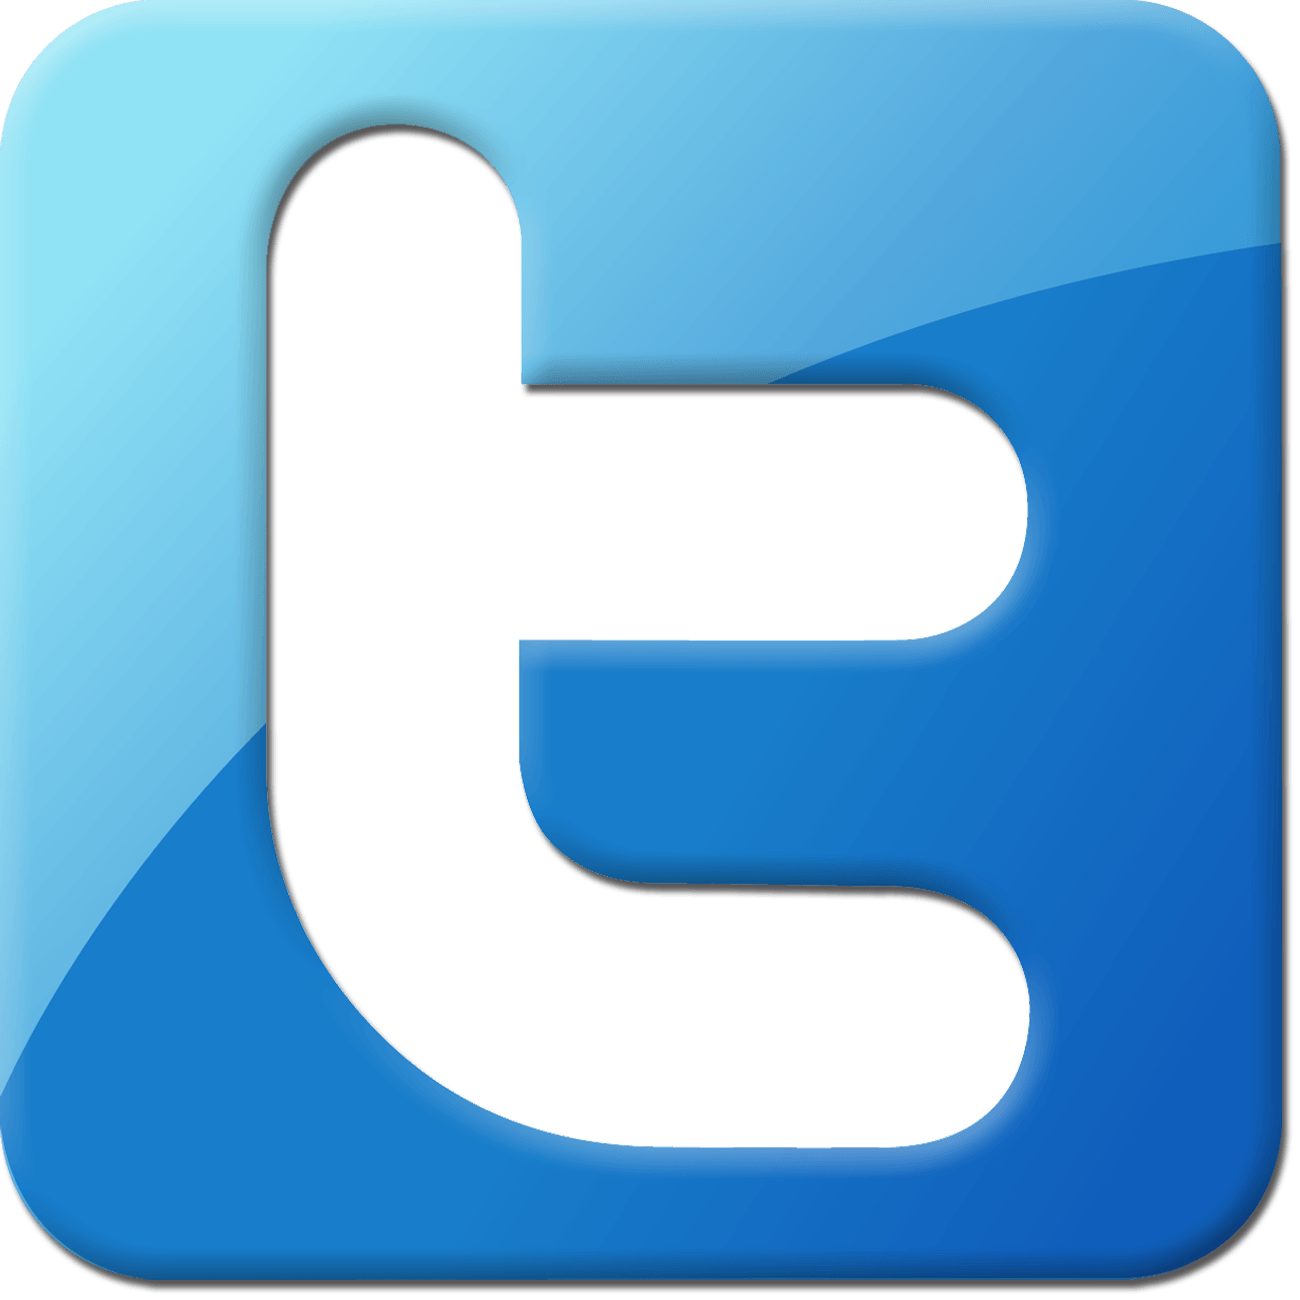 Find Us On Twitter Logo - Logo Twitter Transparent PNG Pictures - Free Icons and PNG Backgrounds